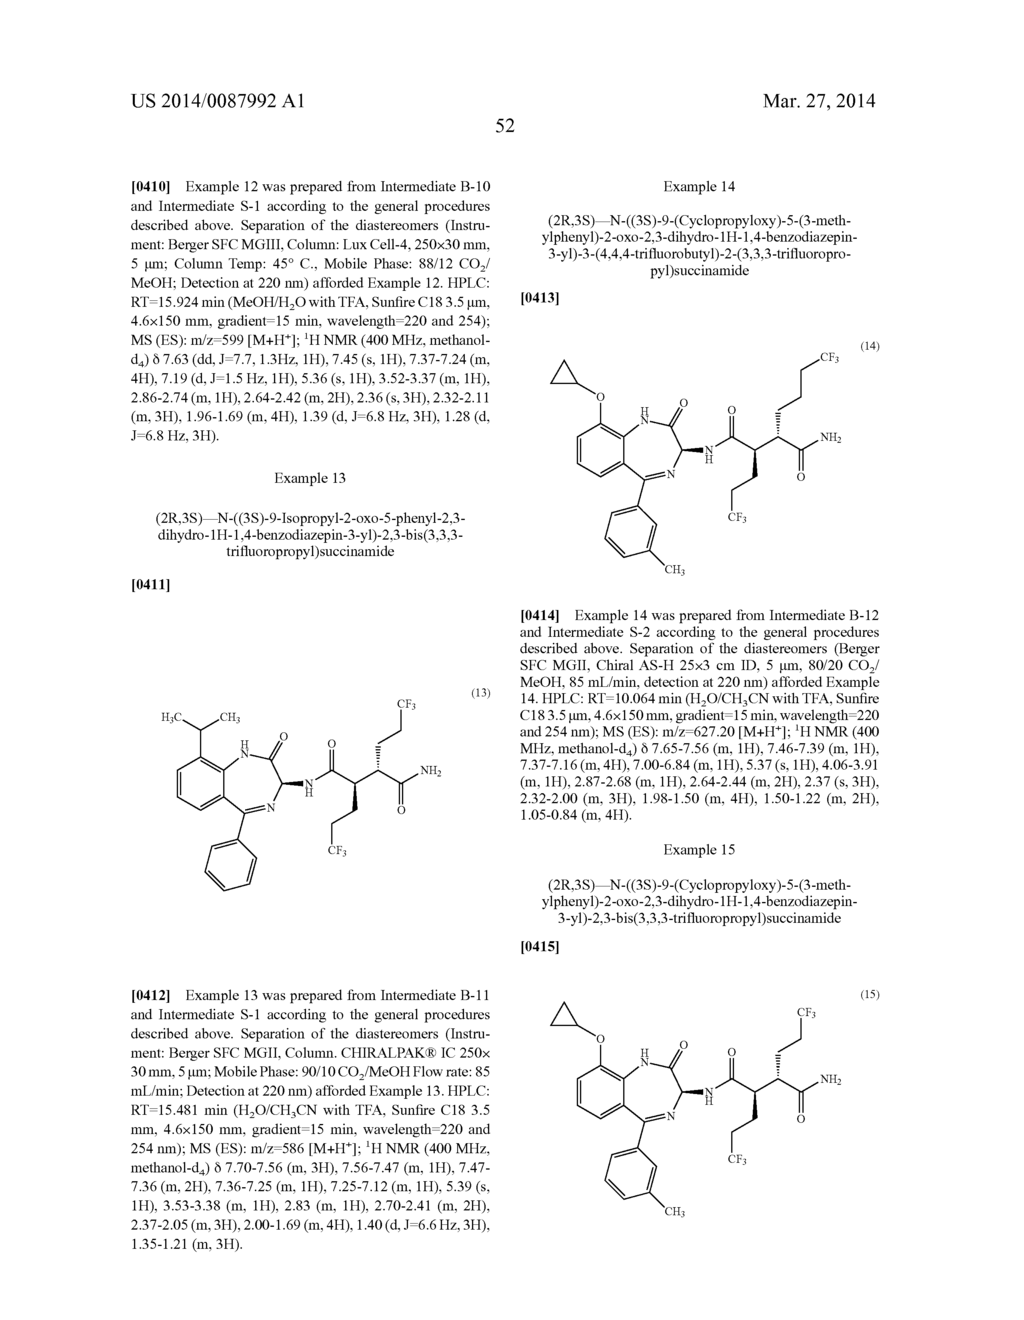 BIS(FLUOROALKYL)-1,4-BENZODIAZEPINONE COMPOUNDS AND PRODRUGS THEREOF - diagram, schematic, and image 59